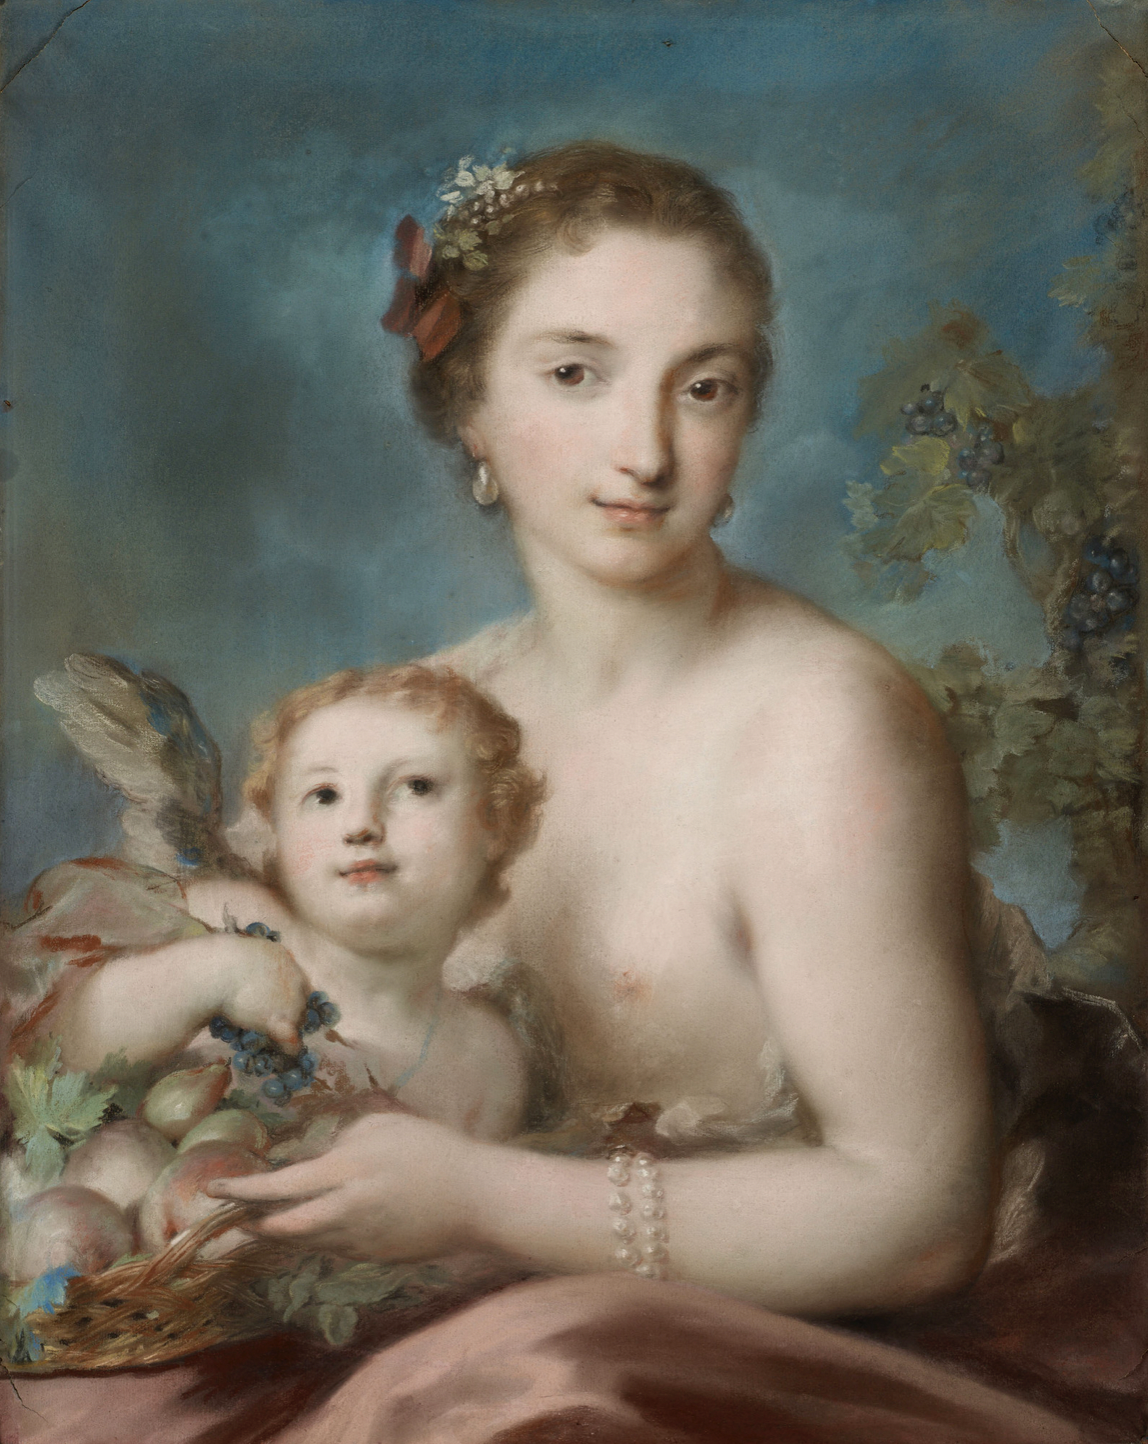 Rosalba Giovanna Carriera, "A Personification of Autumn," c.1730, pastel on blue paper, 66 x 49.2 cm, Royal Collection Trust, UK